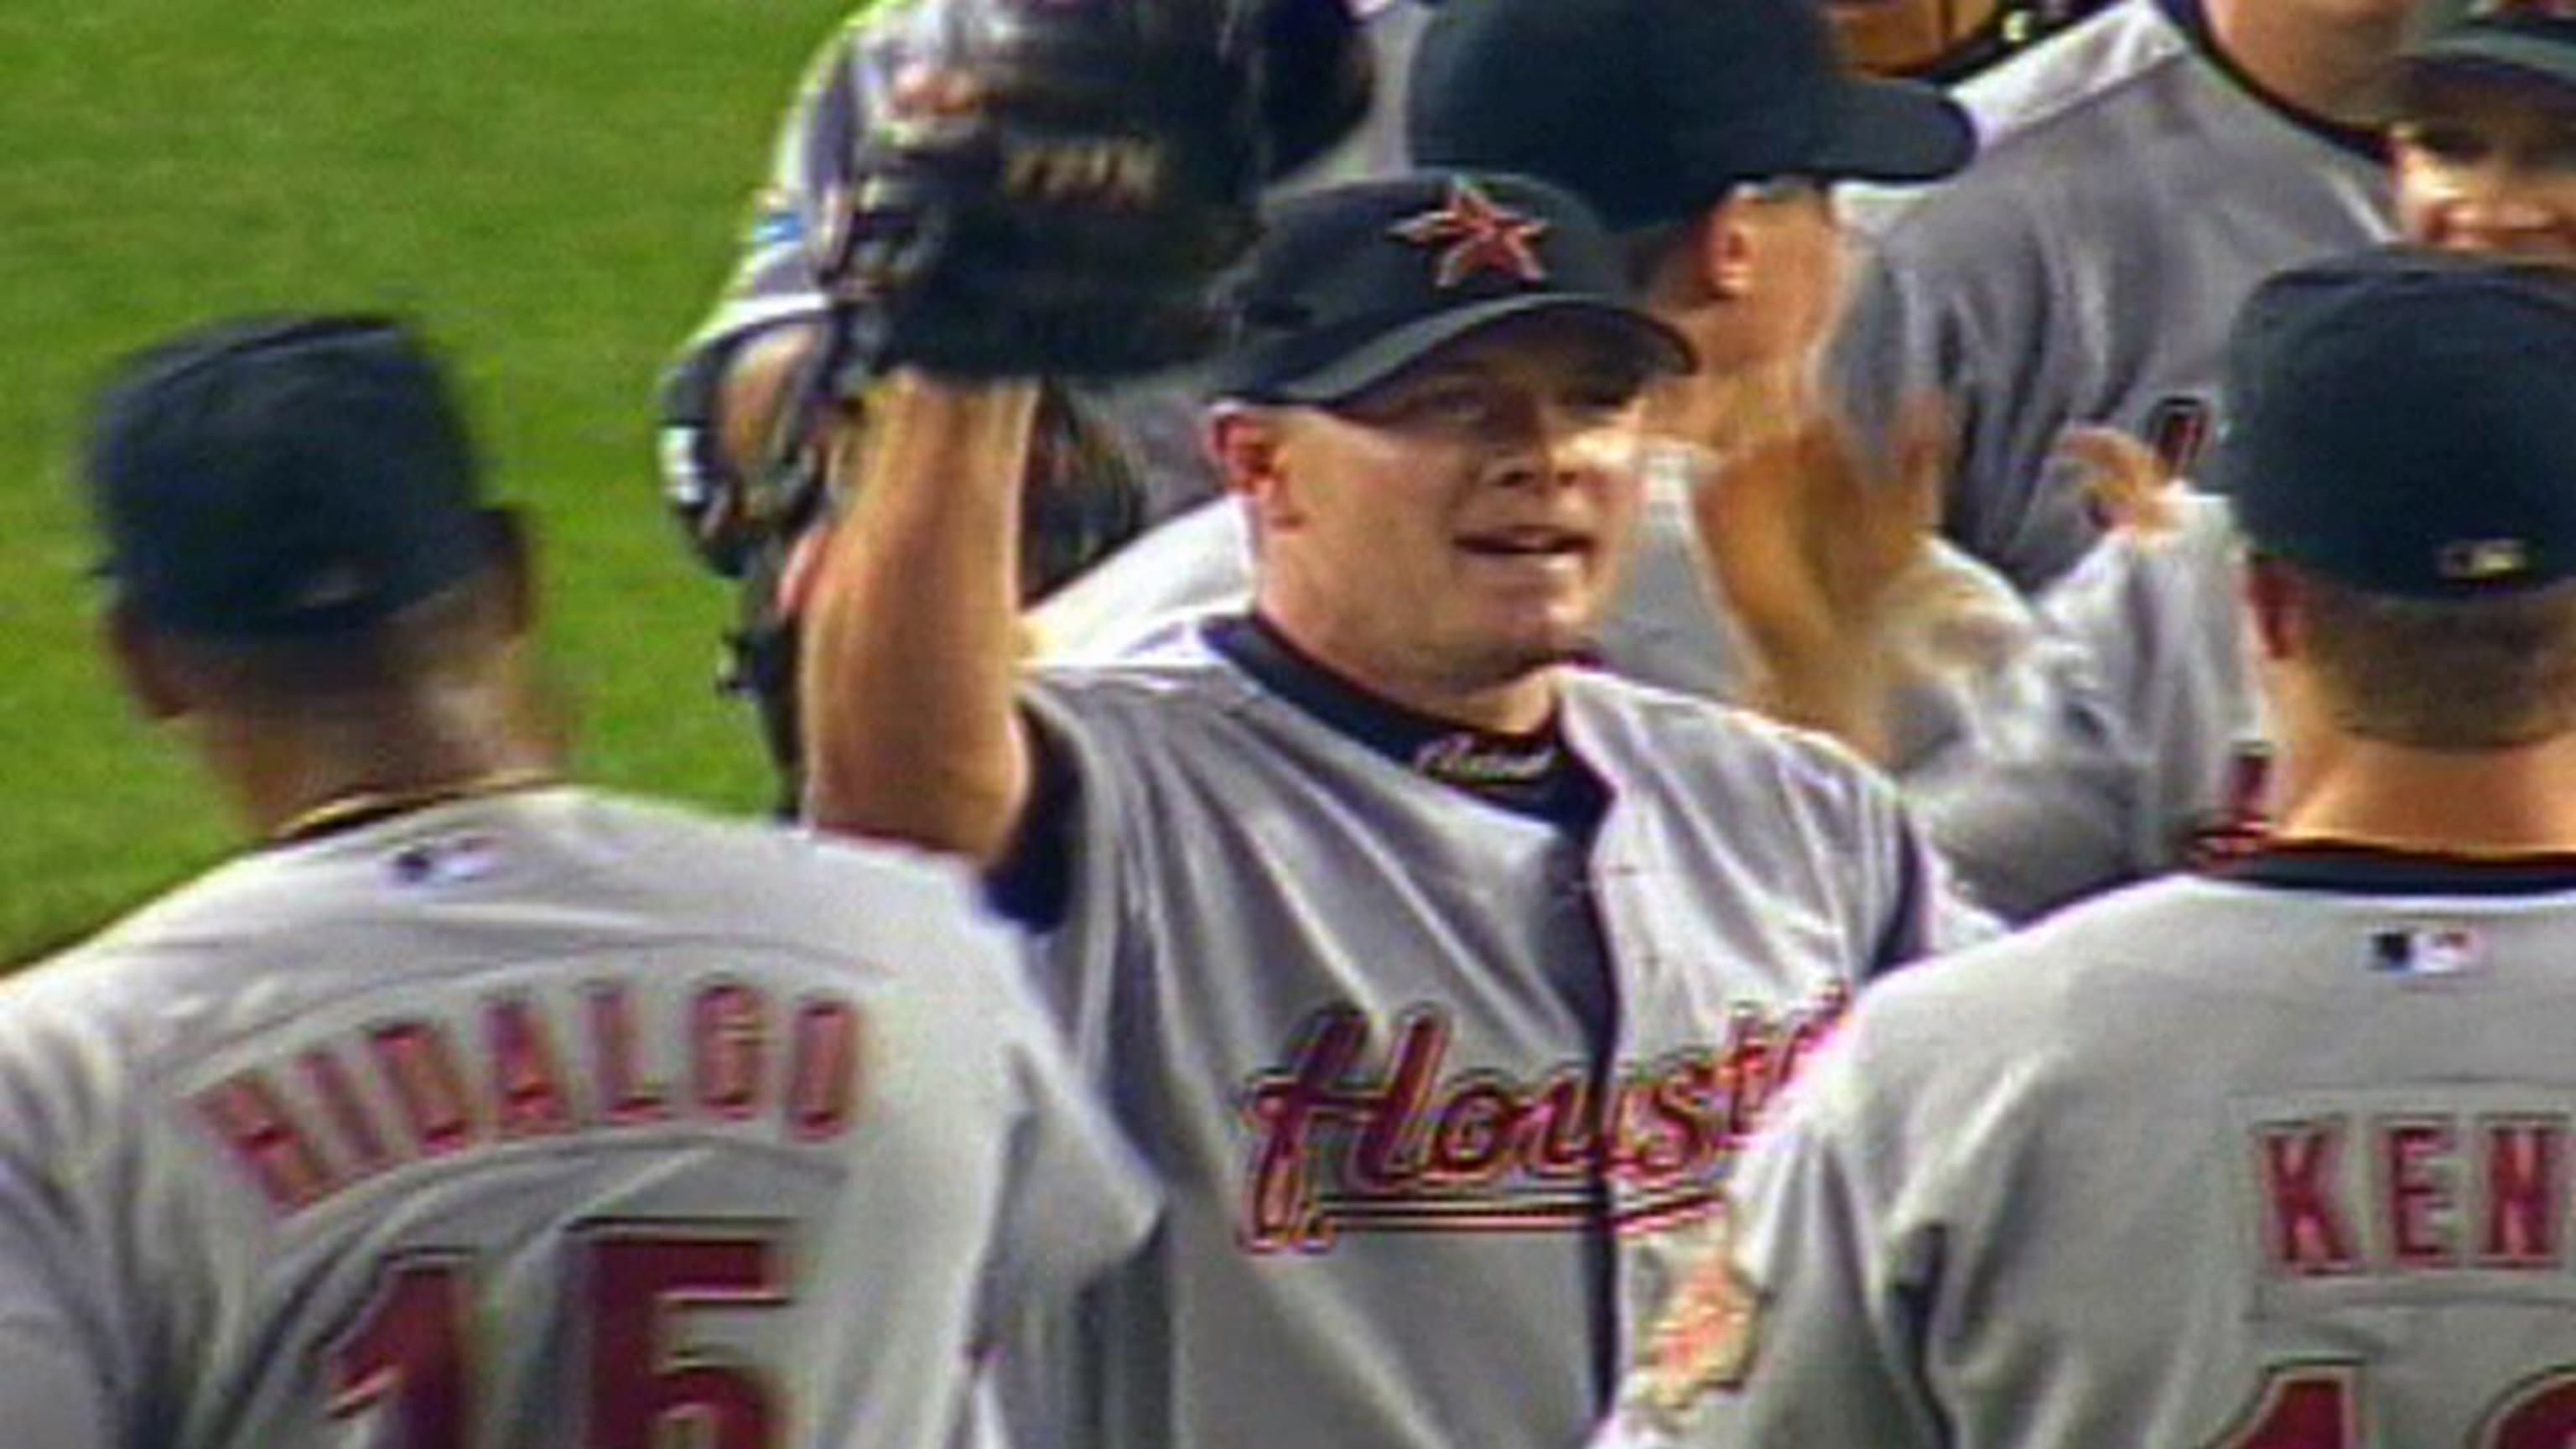 Billy Wagner's top moments